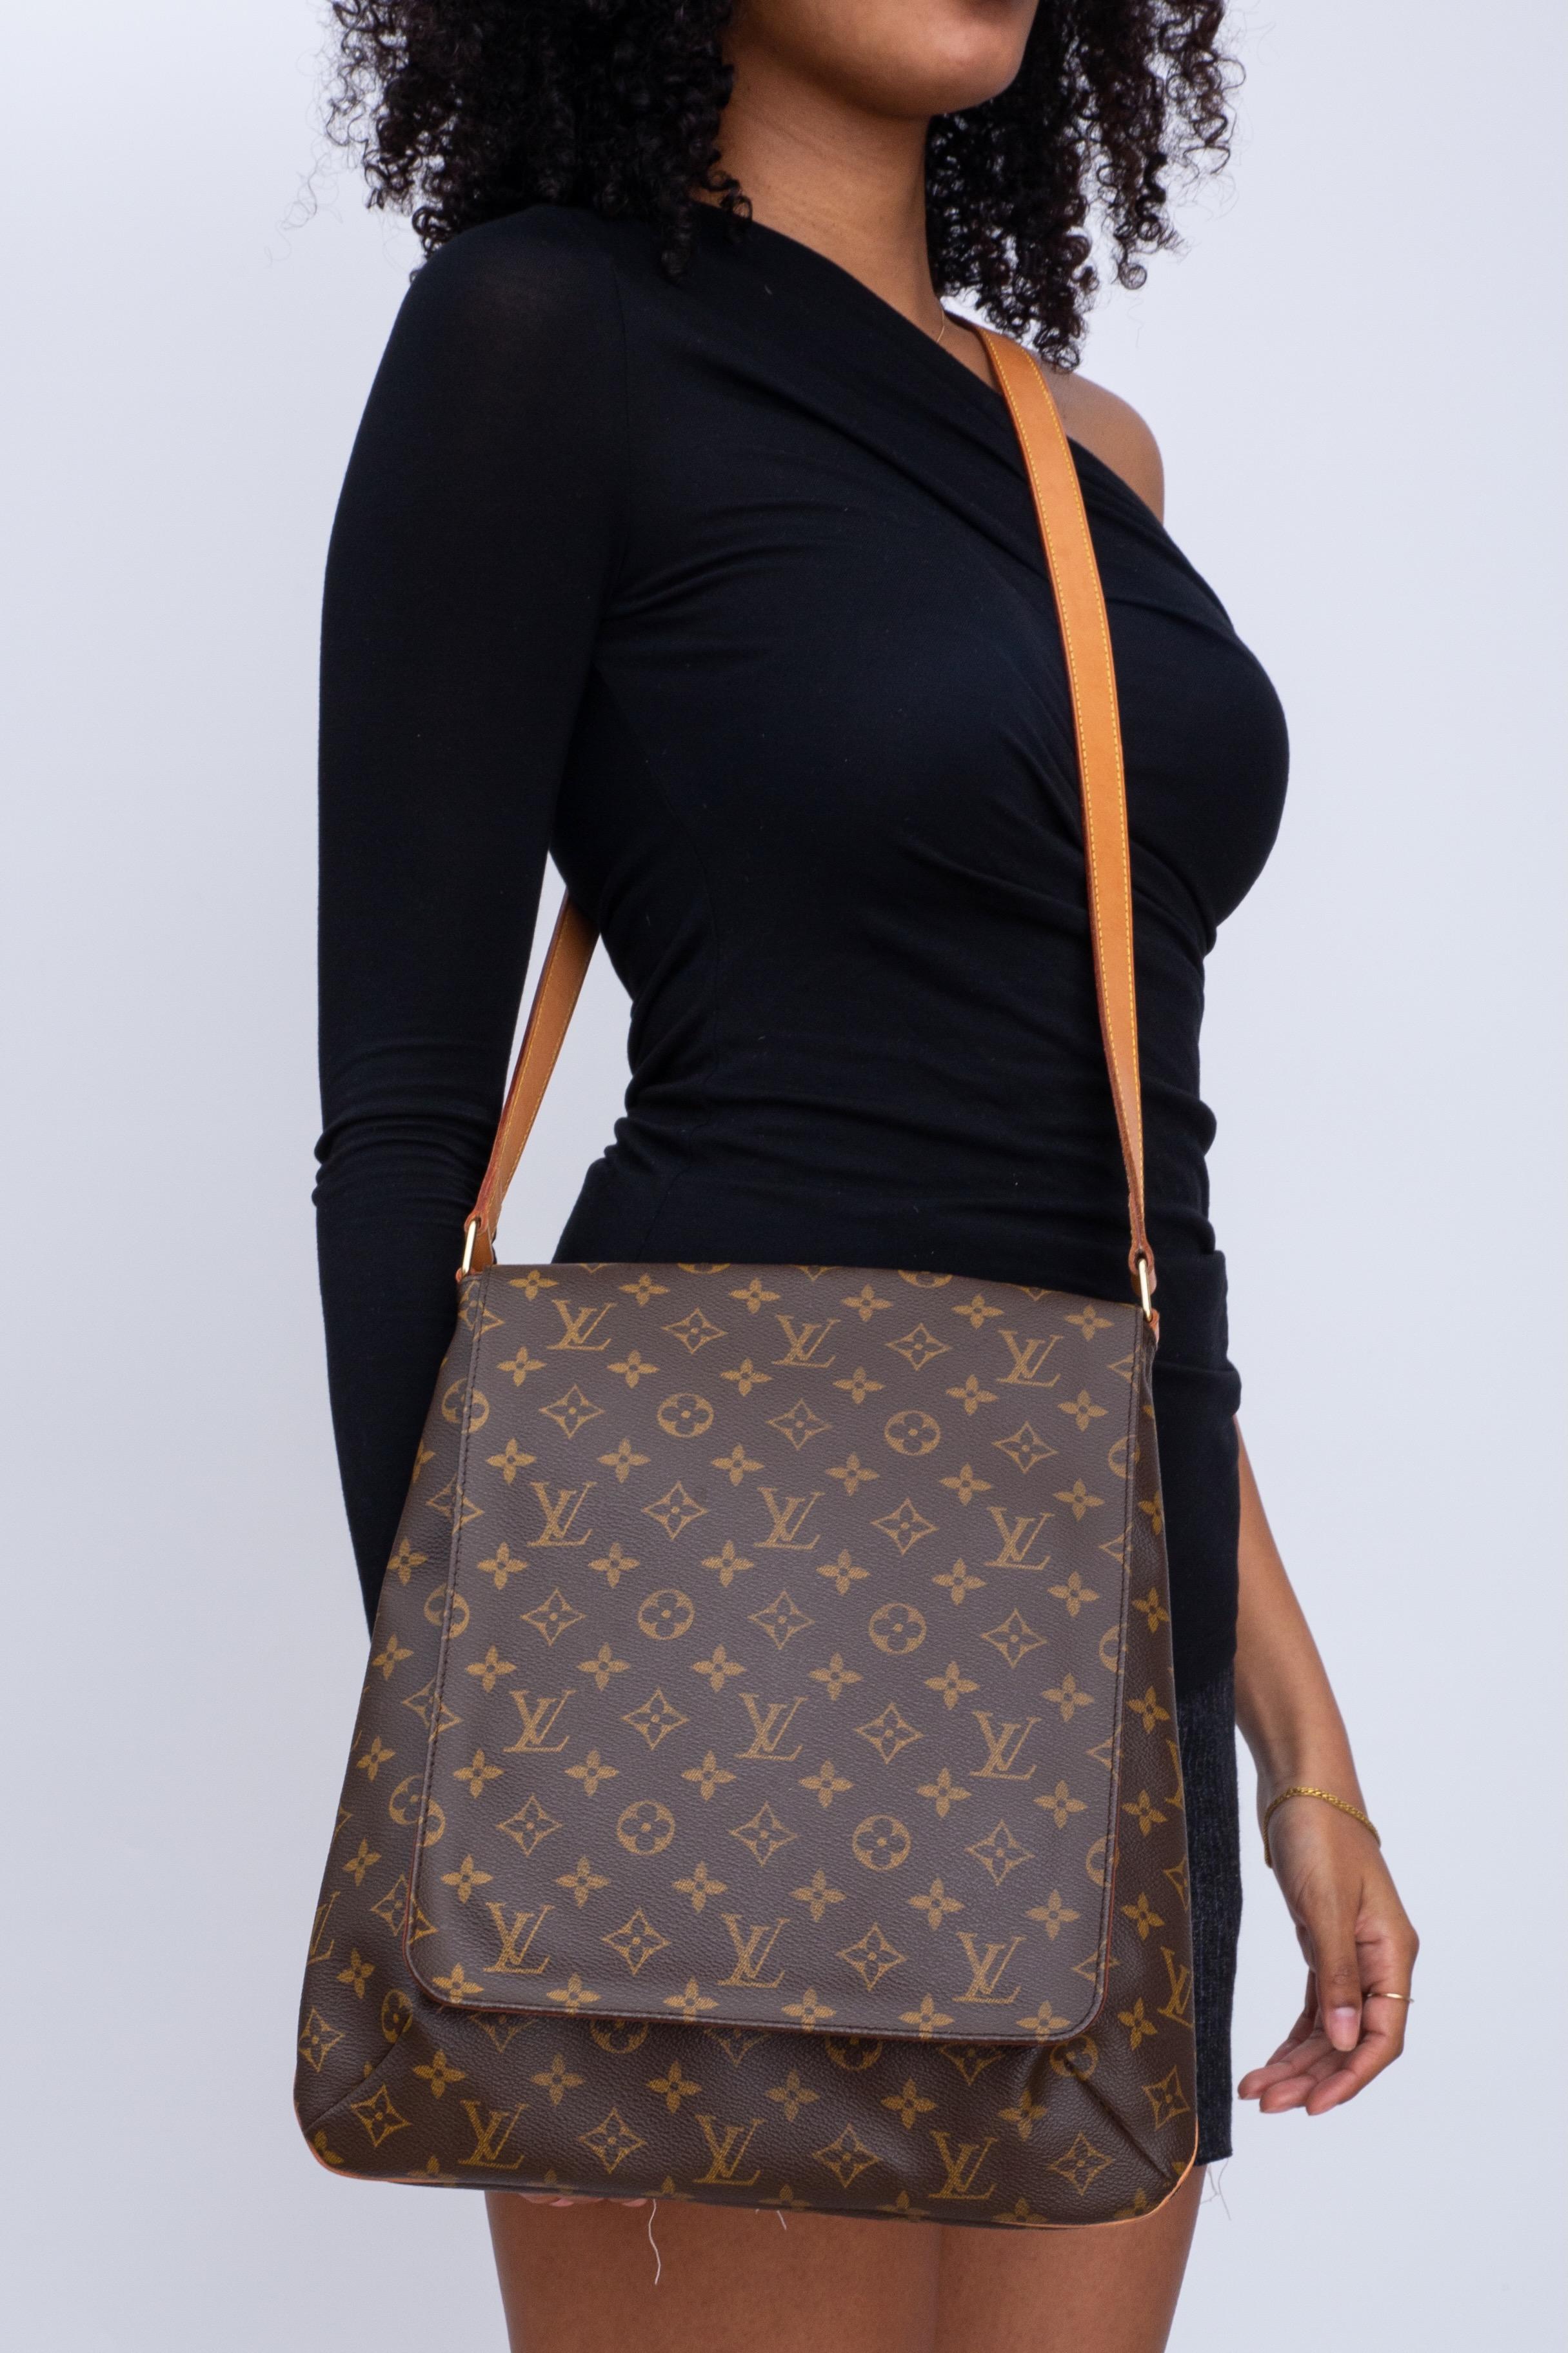 This bad is made of coated canvas with lv's monogram print with a long natural leather shoulder strap. The bag features brass hardware, tan vachetta leather details, a single adjustable flat shoulder strap, marigold alcantara interior lining, cross